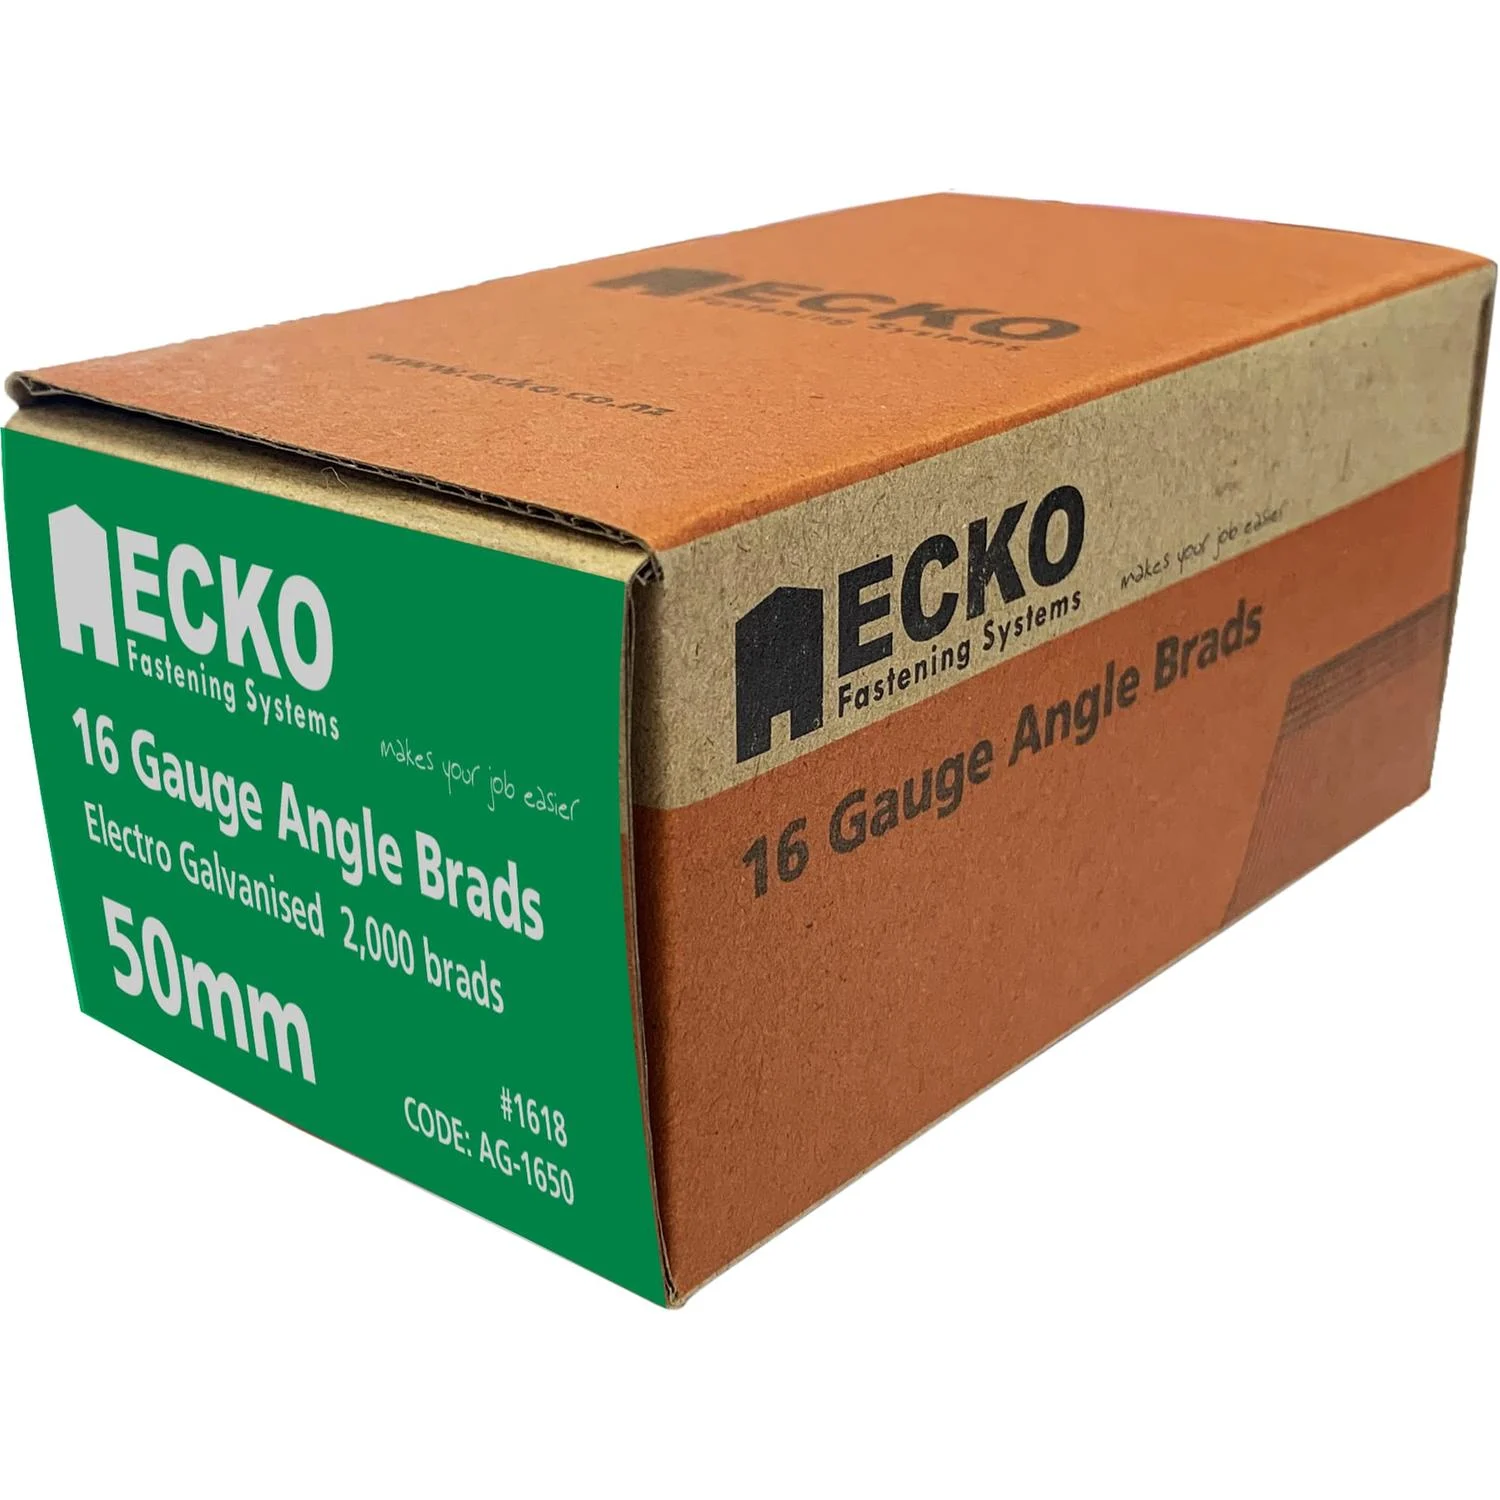 Ecko 16 Gauge Angle Brads Gasless Pack 50 X 1.6Mm Electro Galvanised (2000)